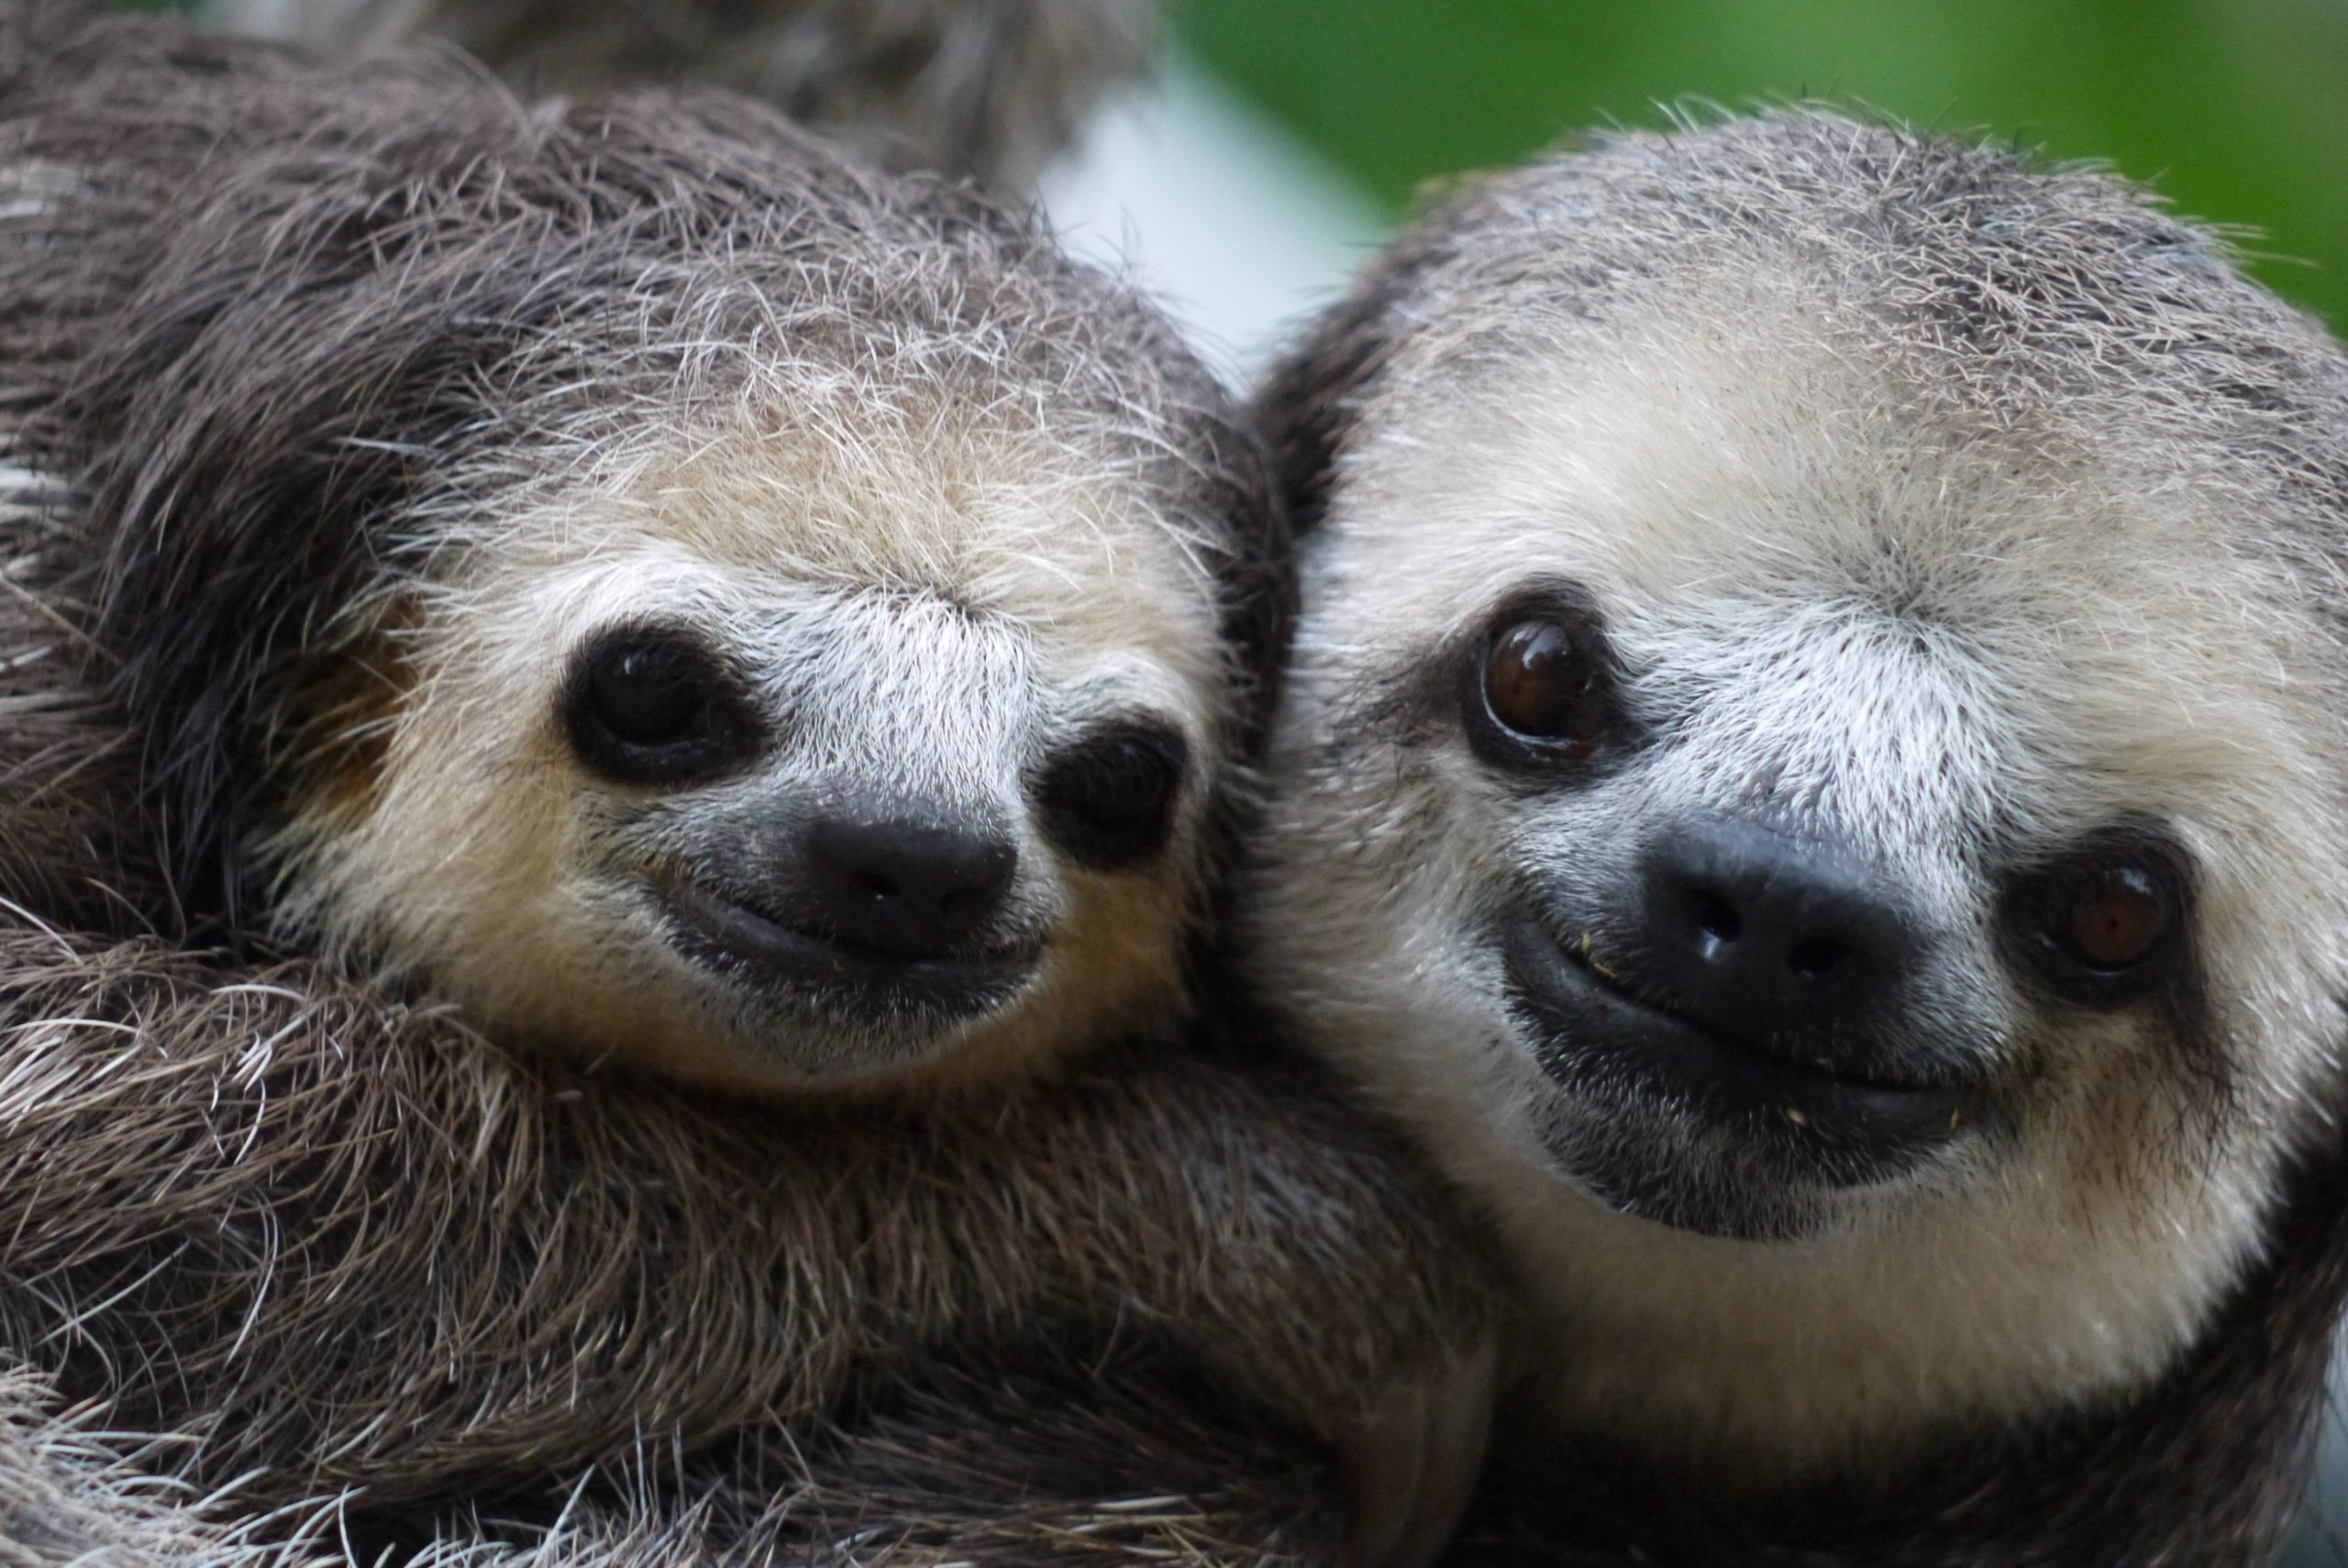 Two sloths hanging in a tree